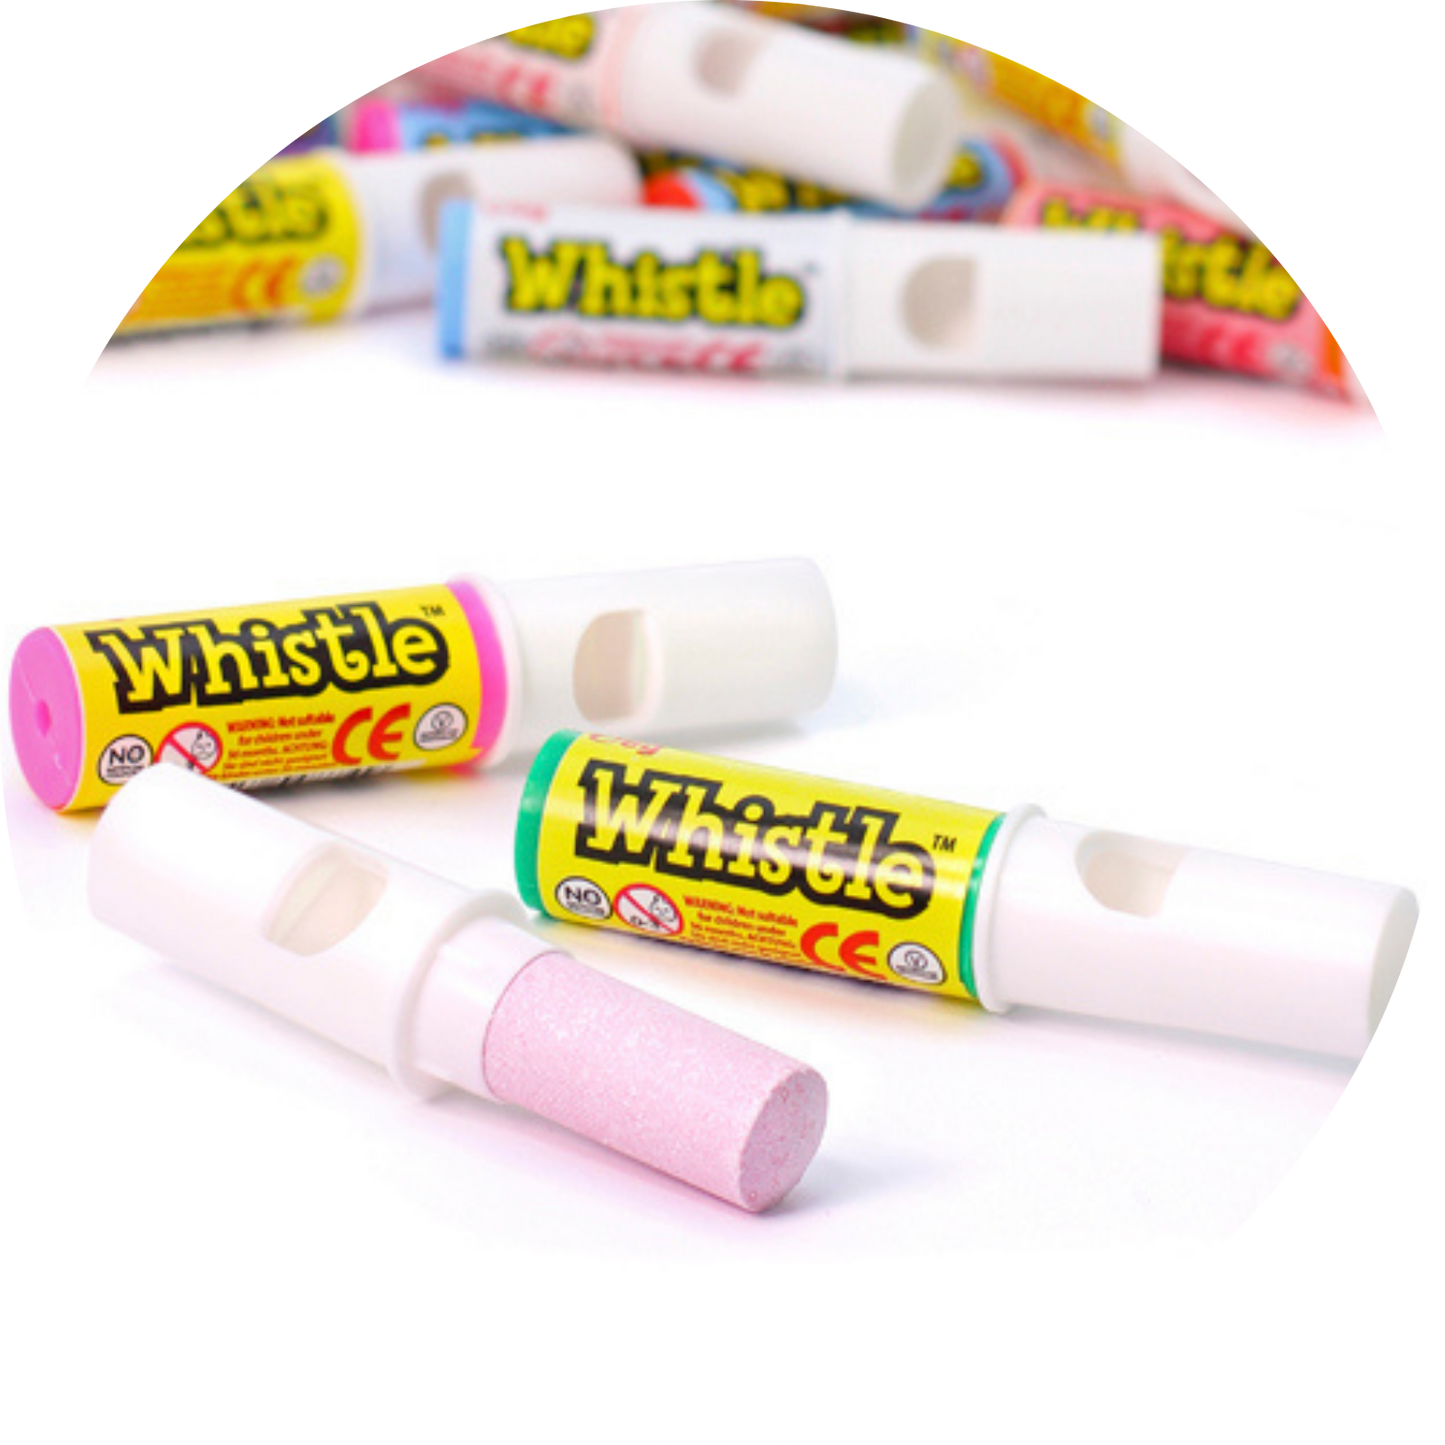 Candy Whistle